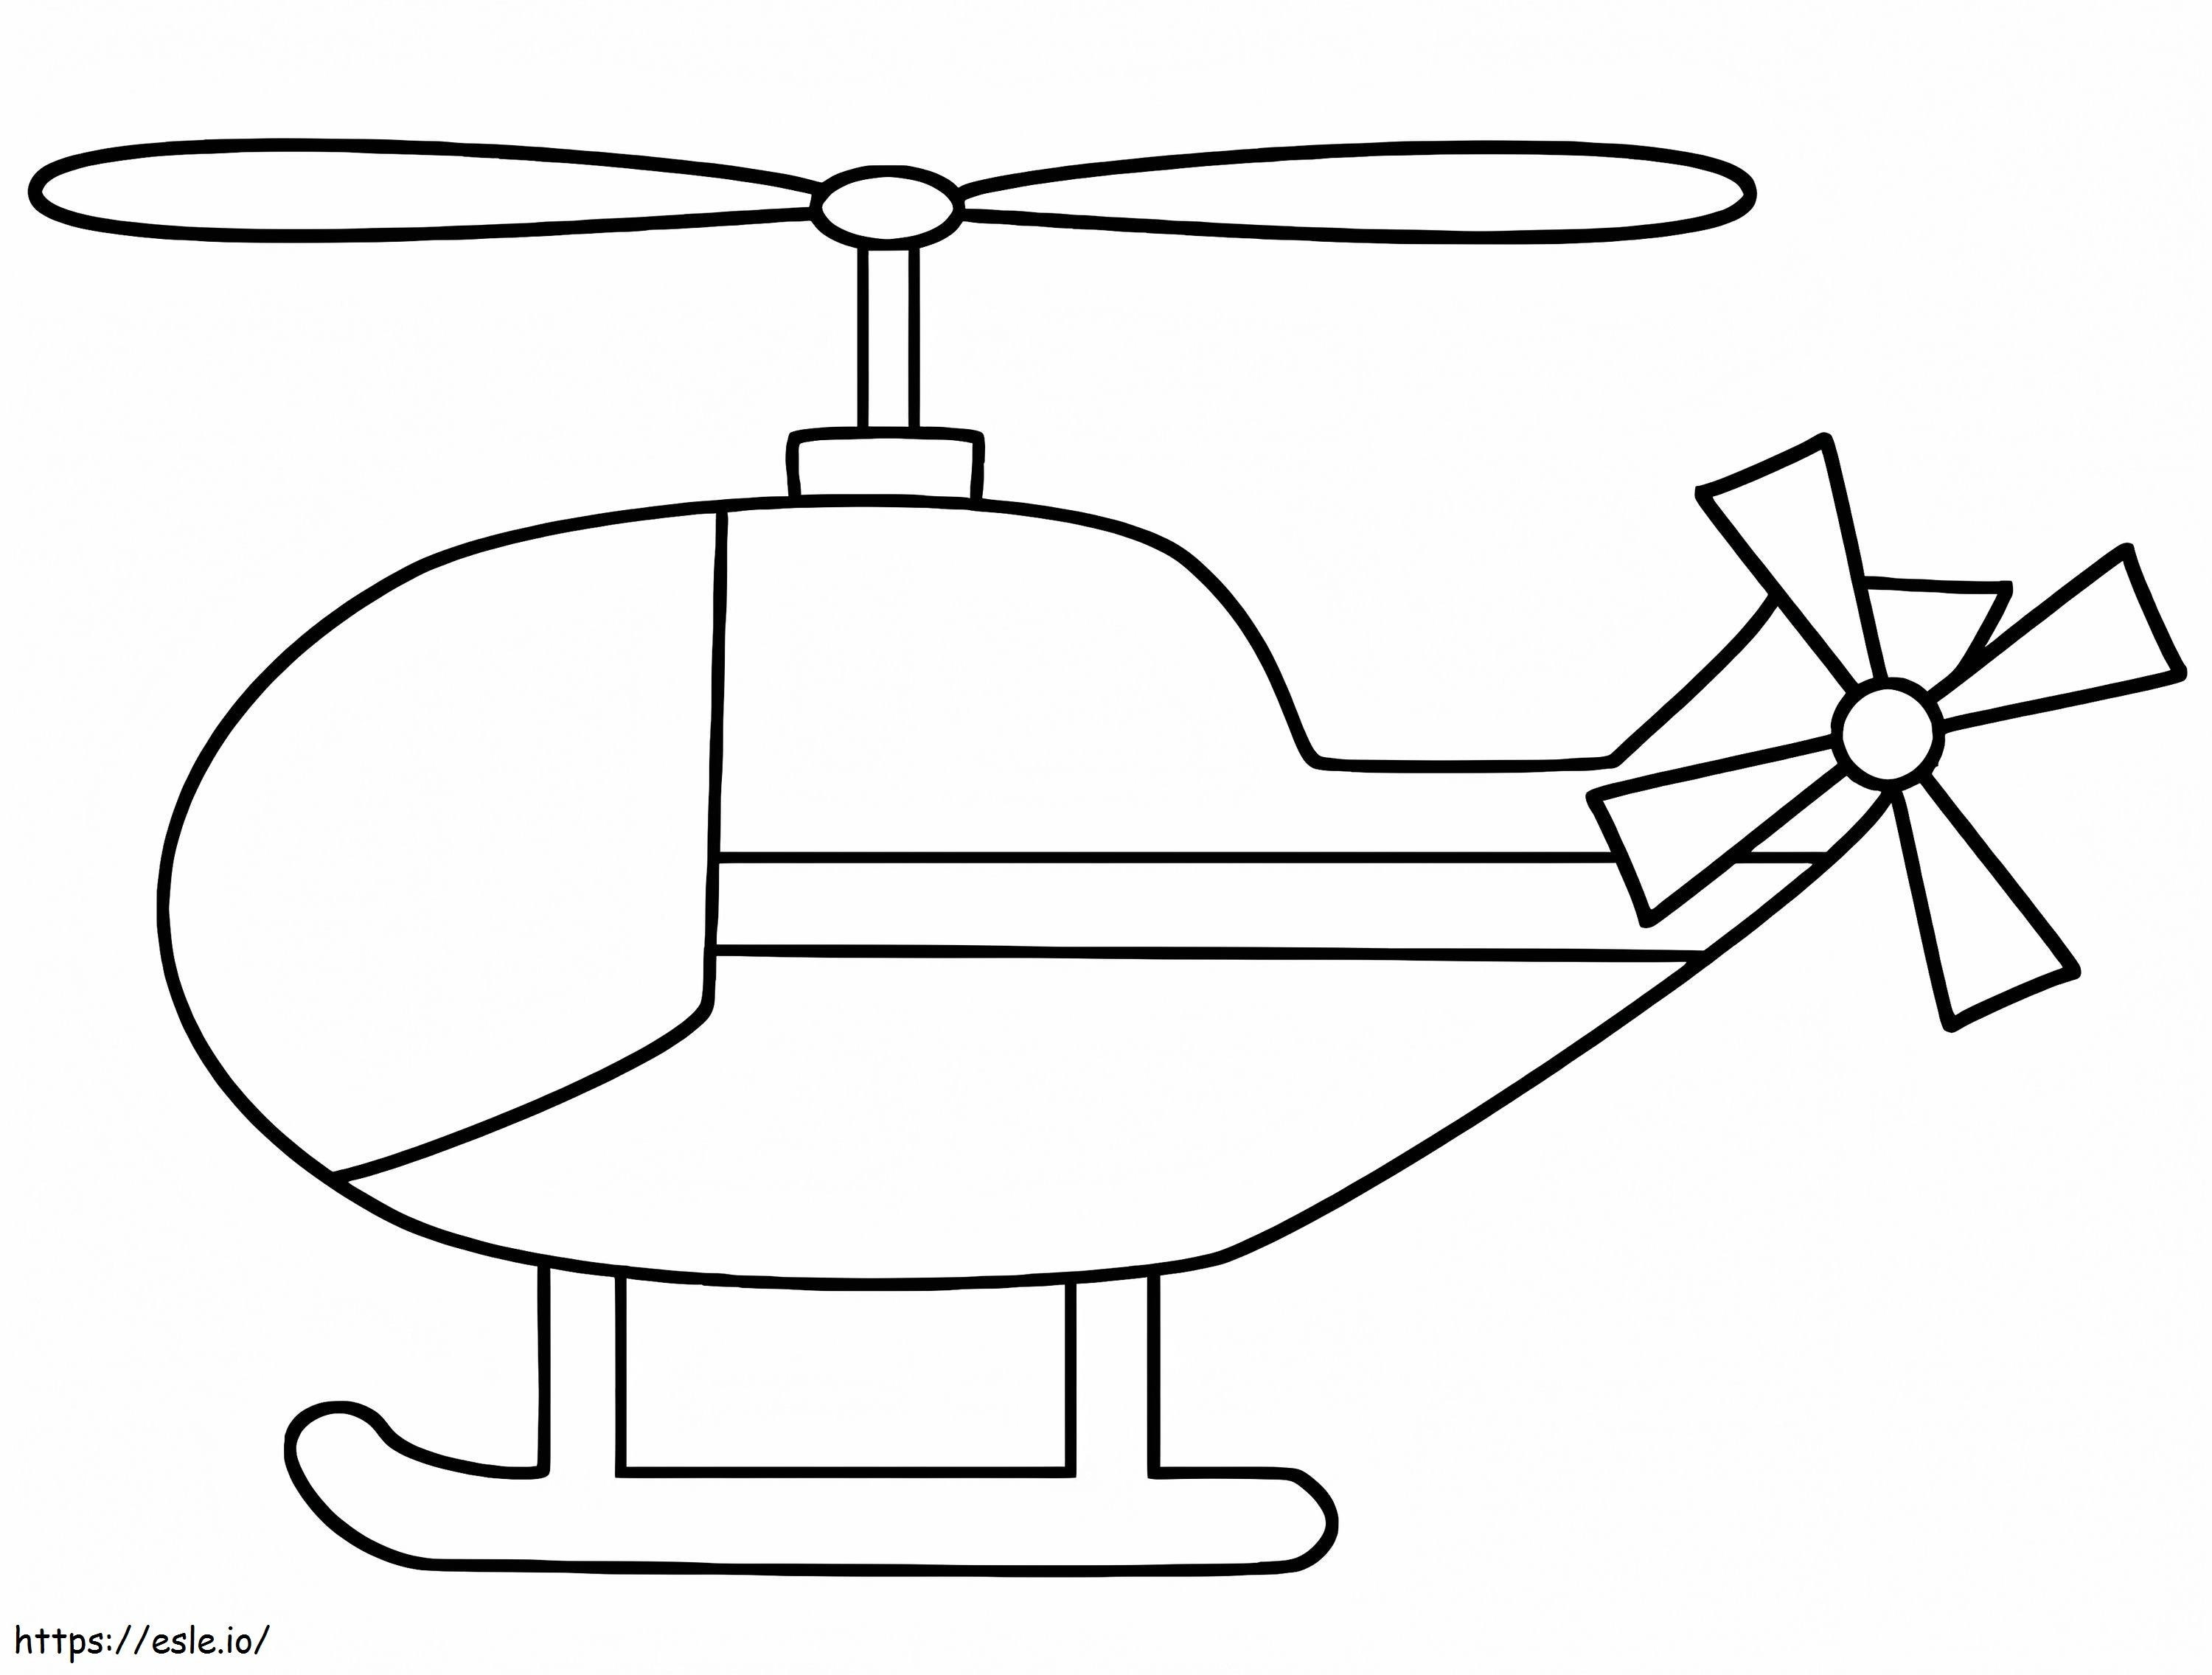 Single Helicopter coloring page